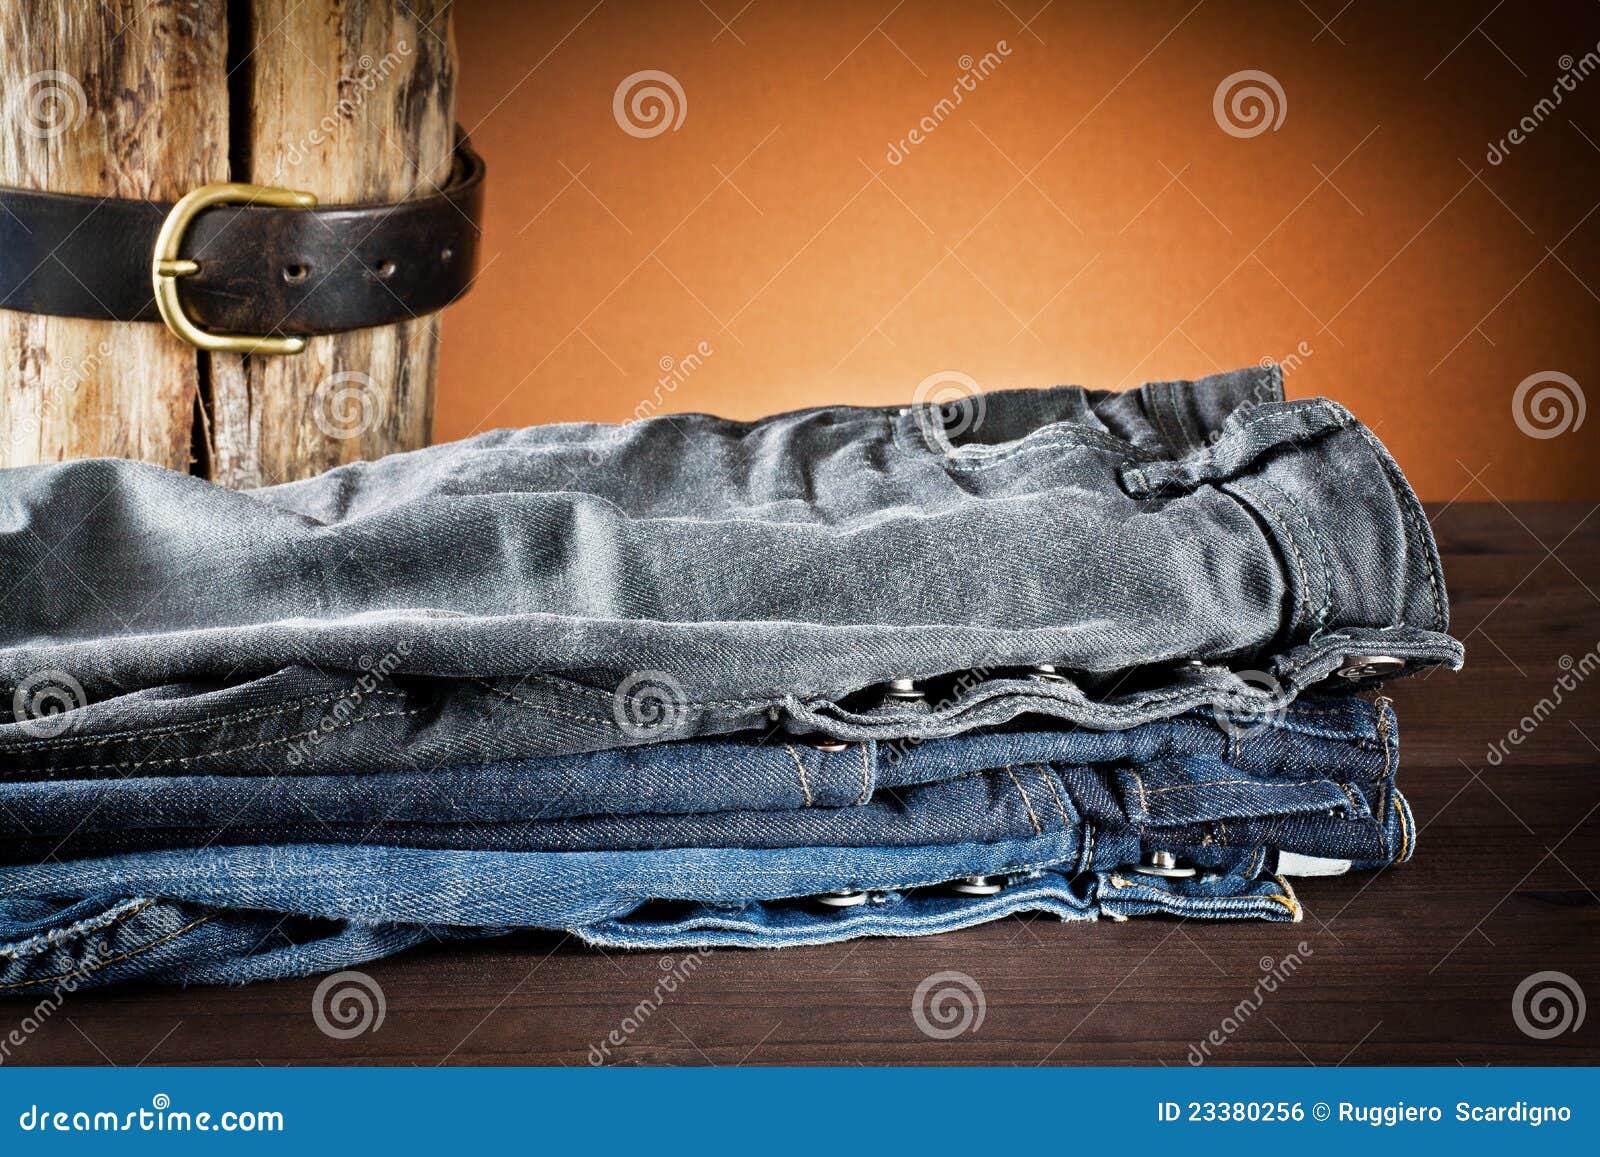 Jeans a variety of colors stock photo. Image of design - 23380256